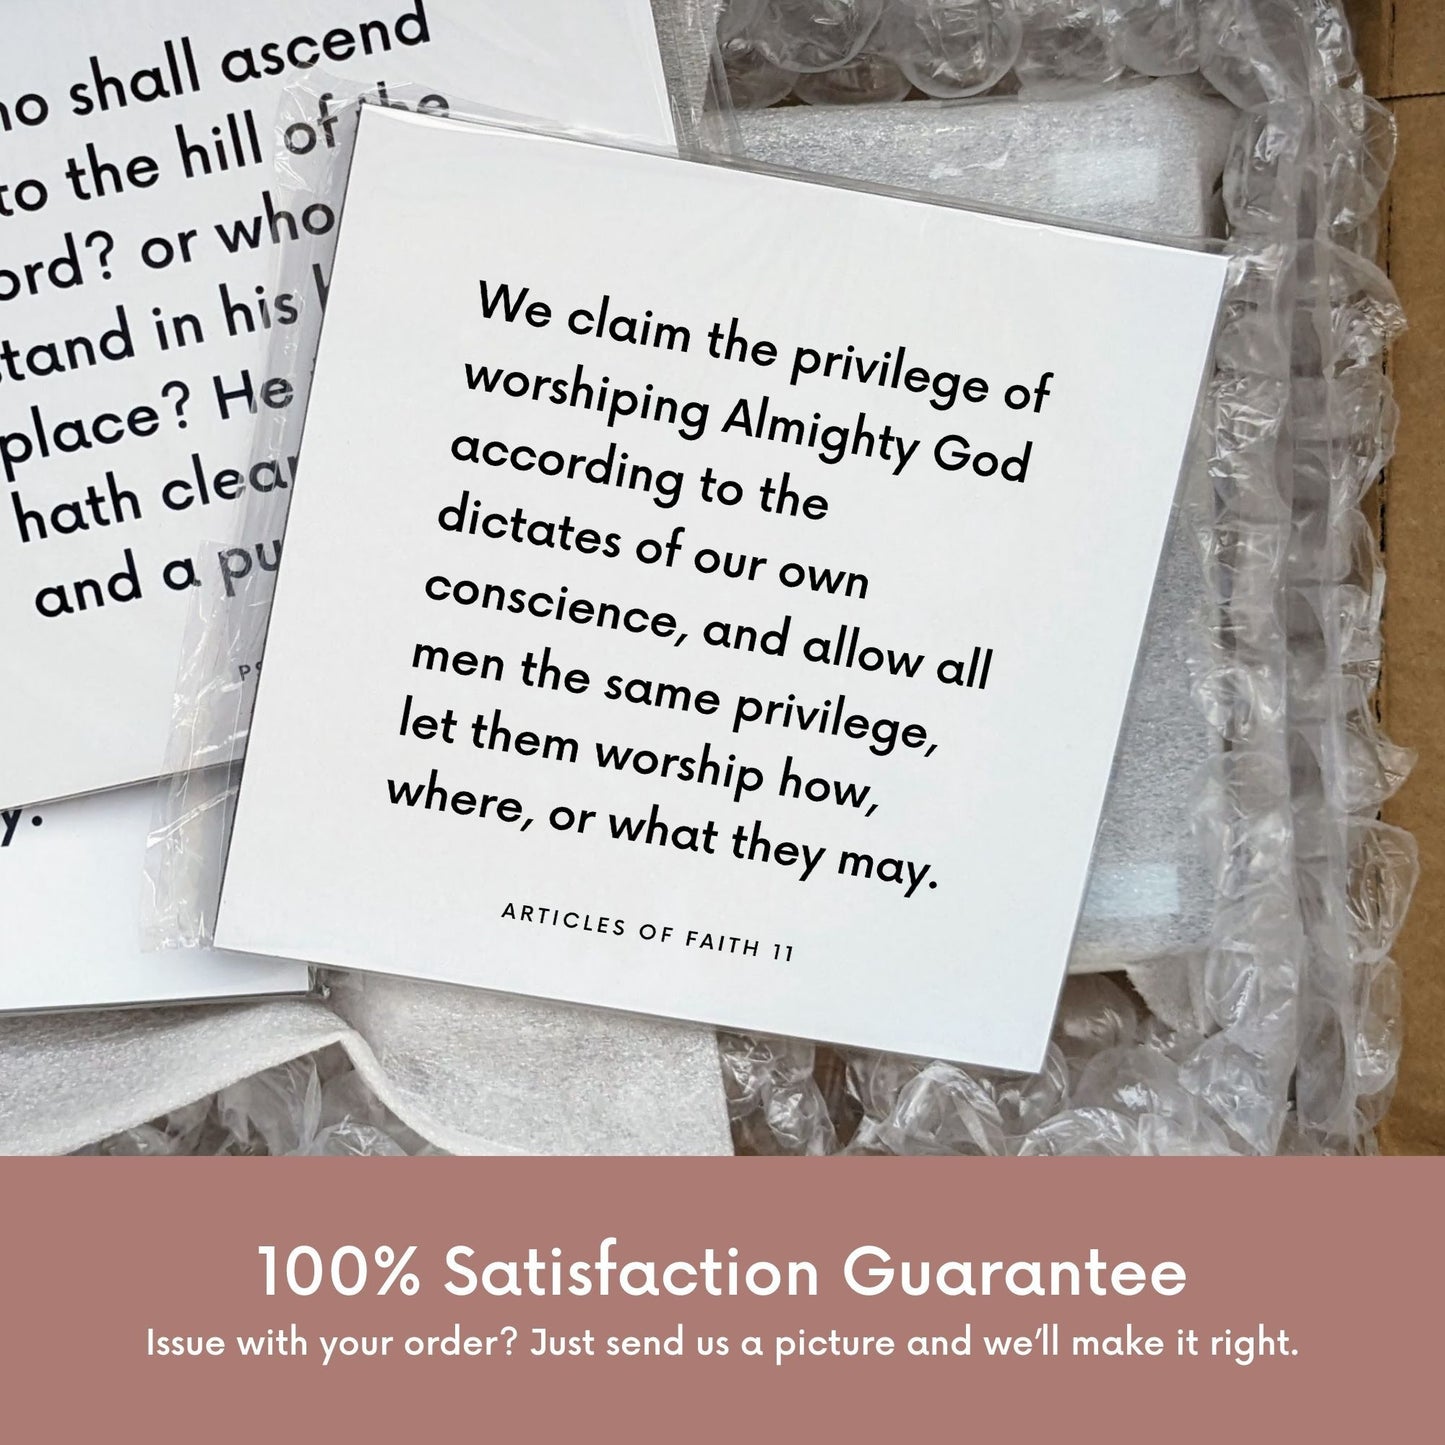 Shipping materials for scripture tile of Articles of Faith 11 - "We claim the privilege of worshiping Almighty God"